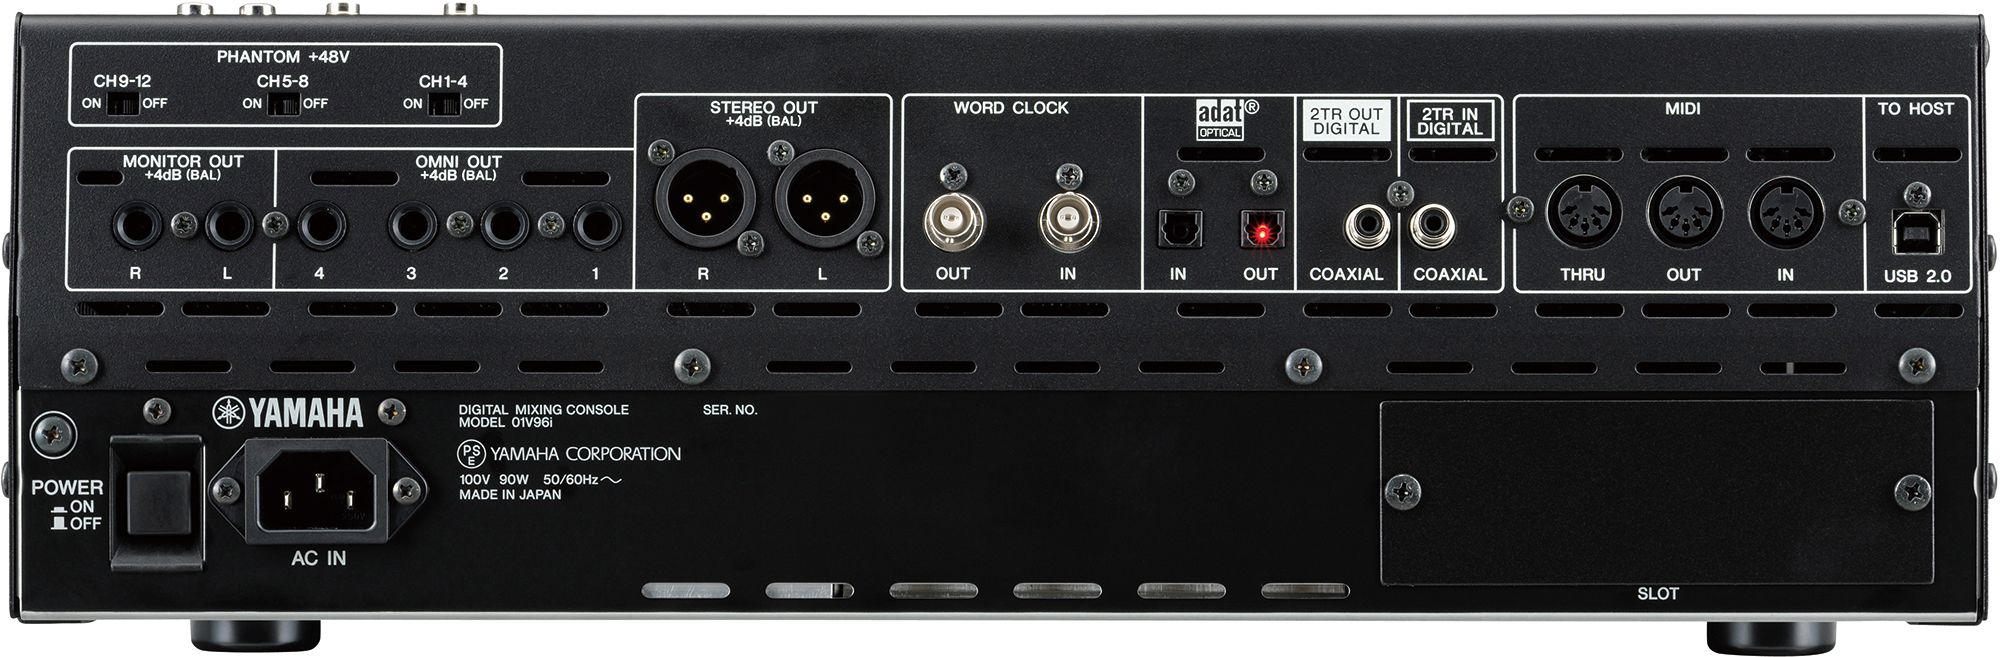 01V96i - Overview - Mixers - Professional Audio - Products 